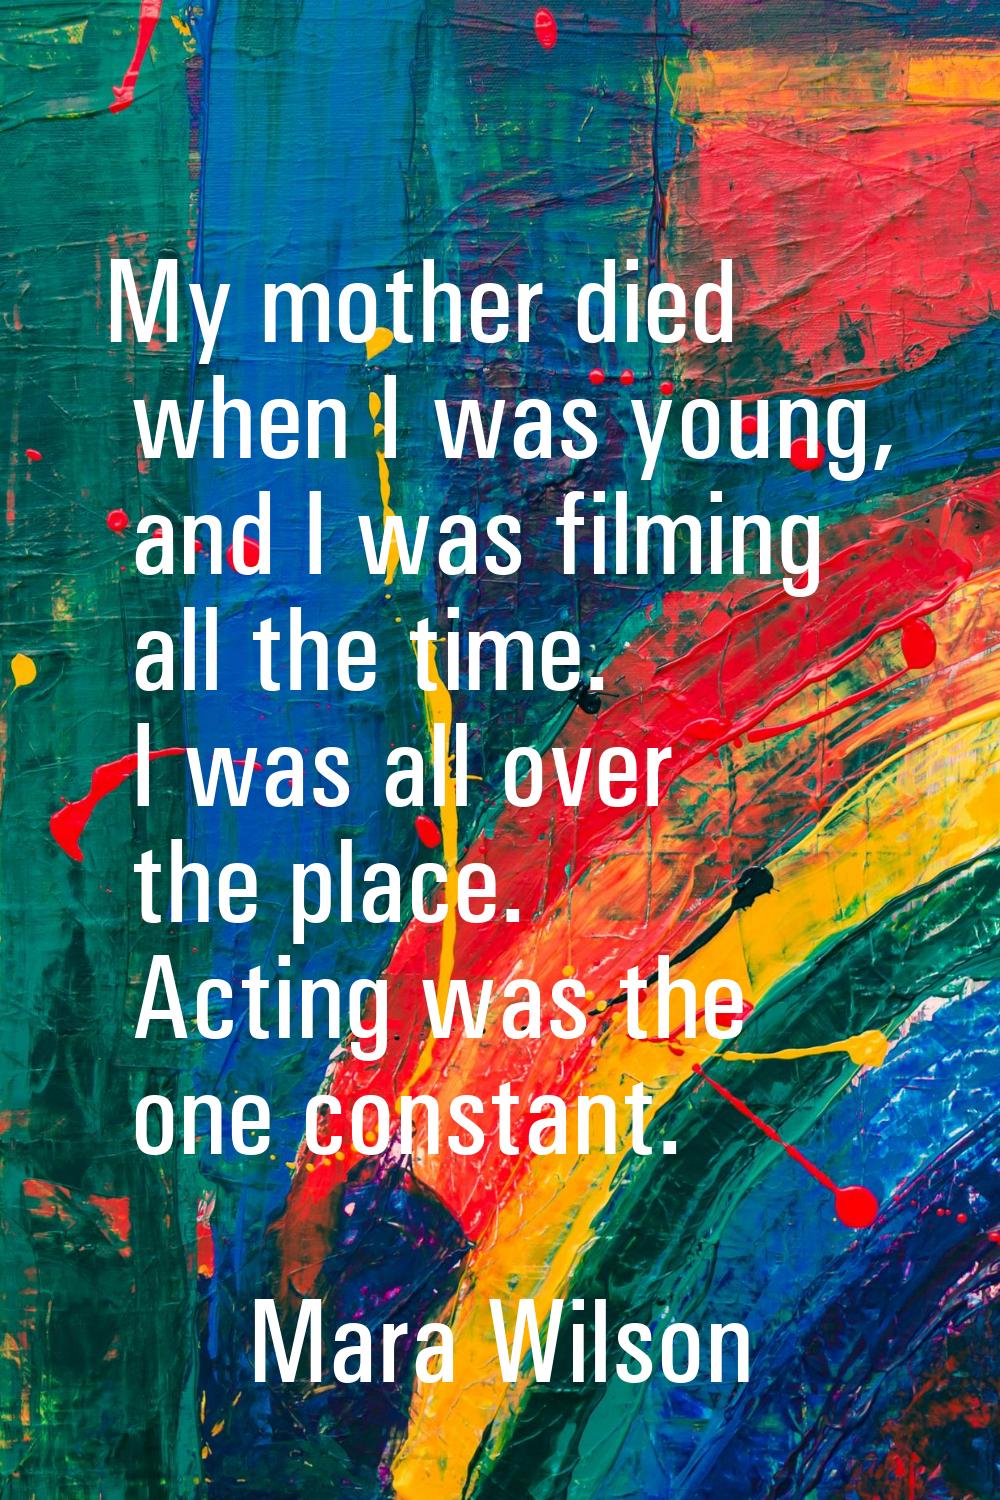 My mother died when I was young, and I was filming all the time. I was all over the place. Acting w